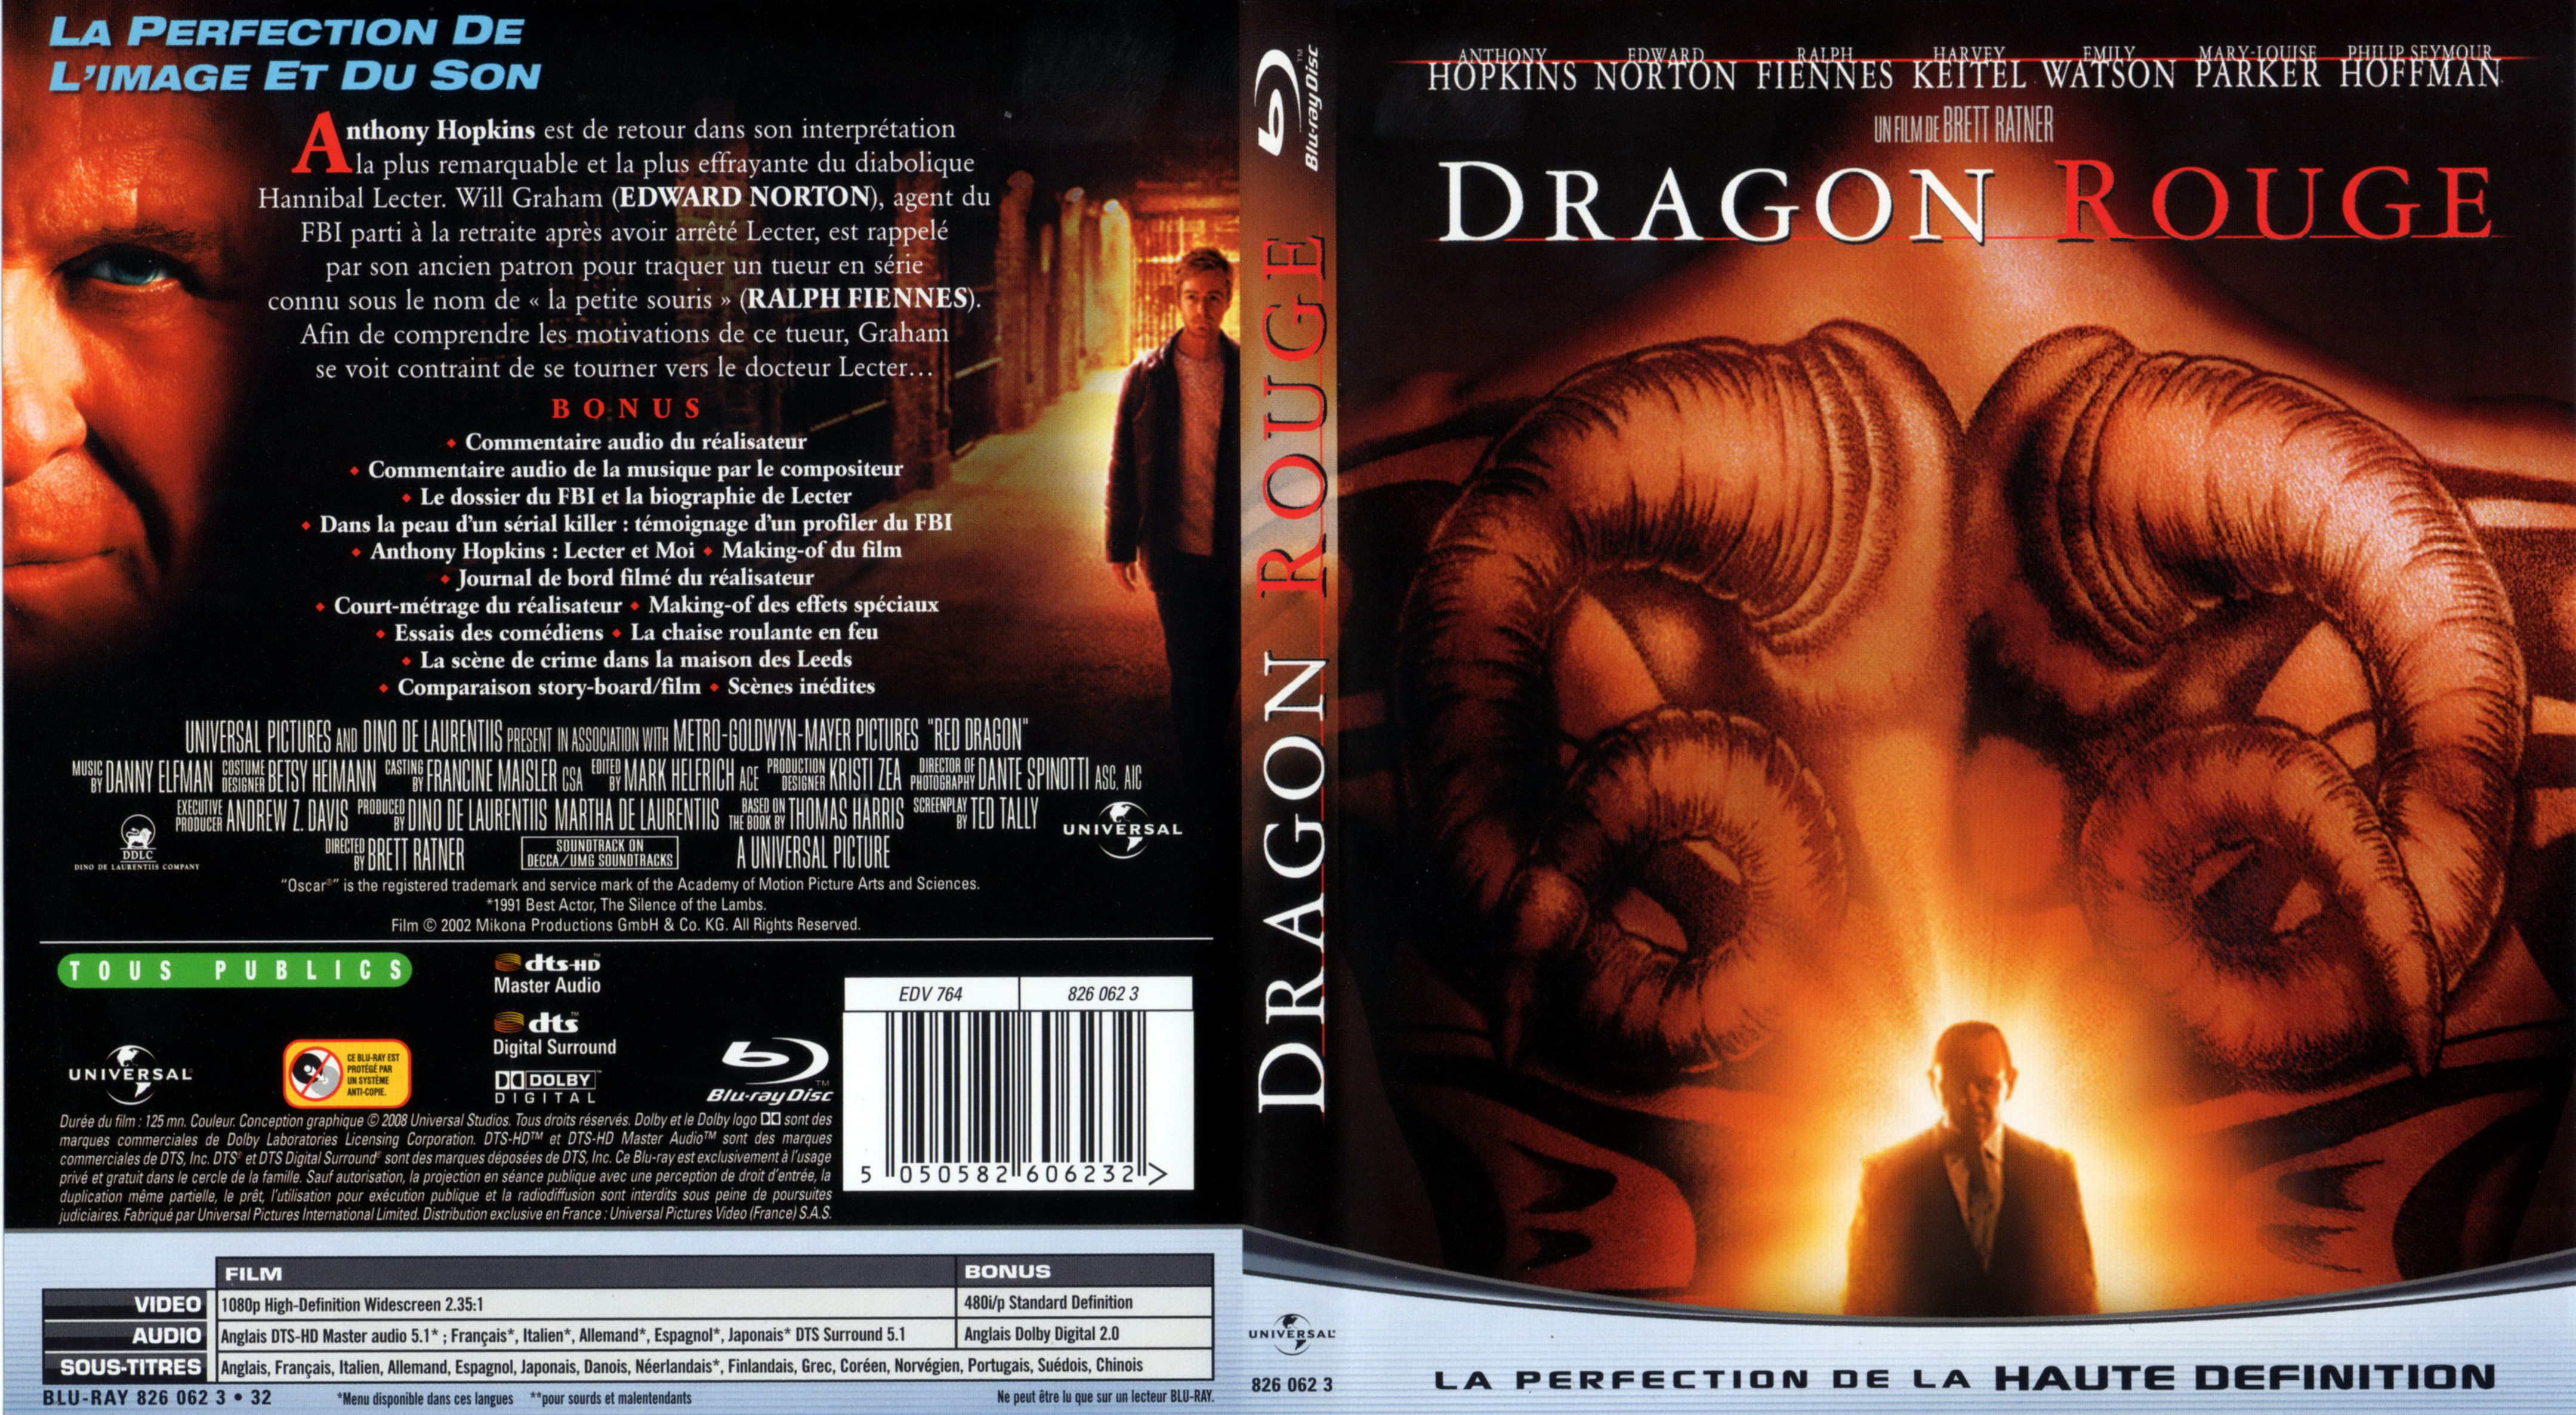 Jaquette DVD Dragon rouge (BLU-RAY)